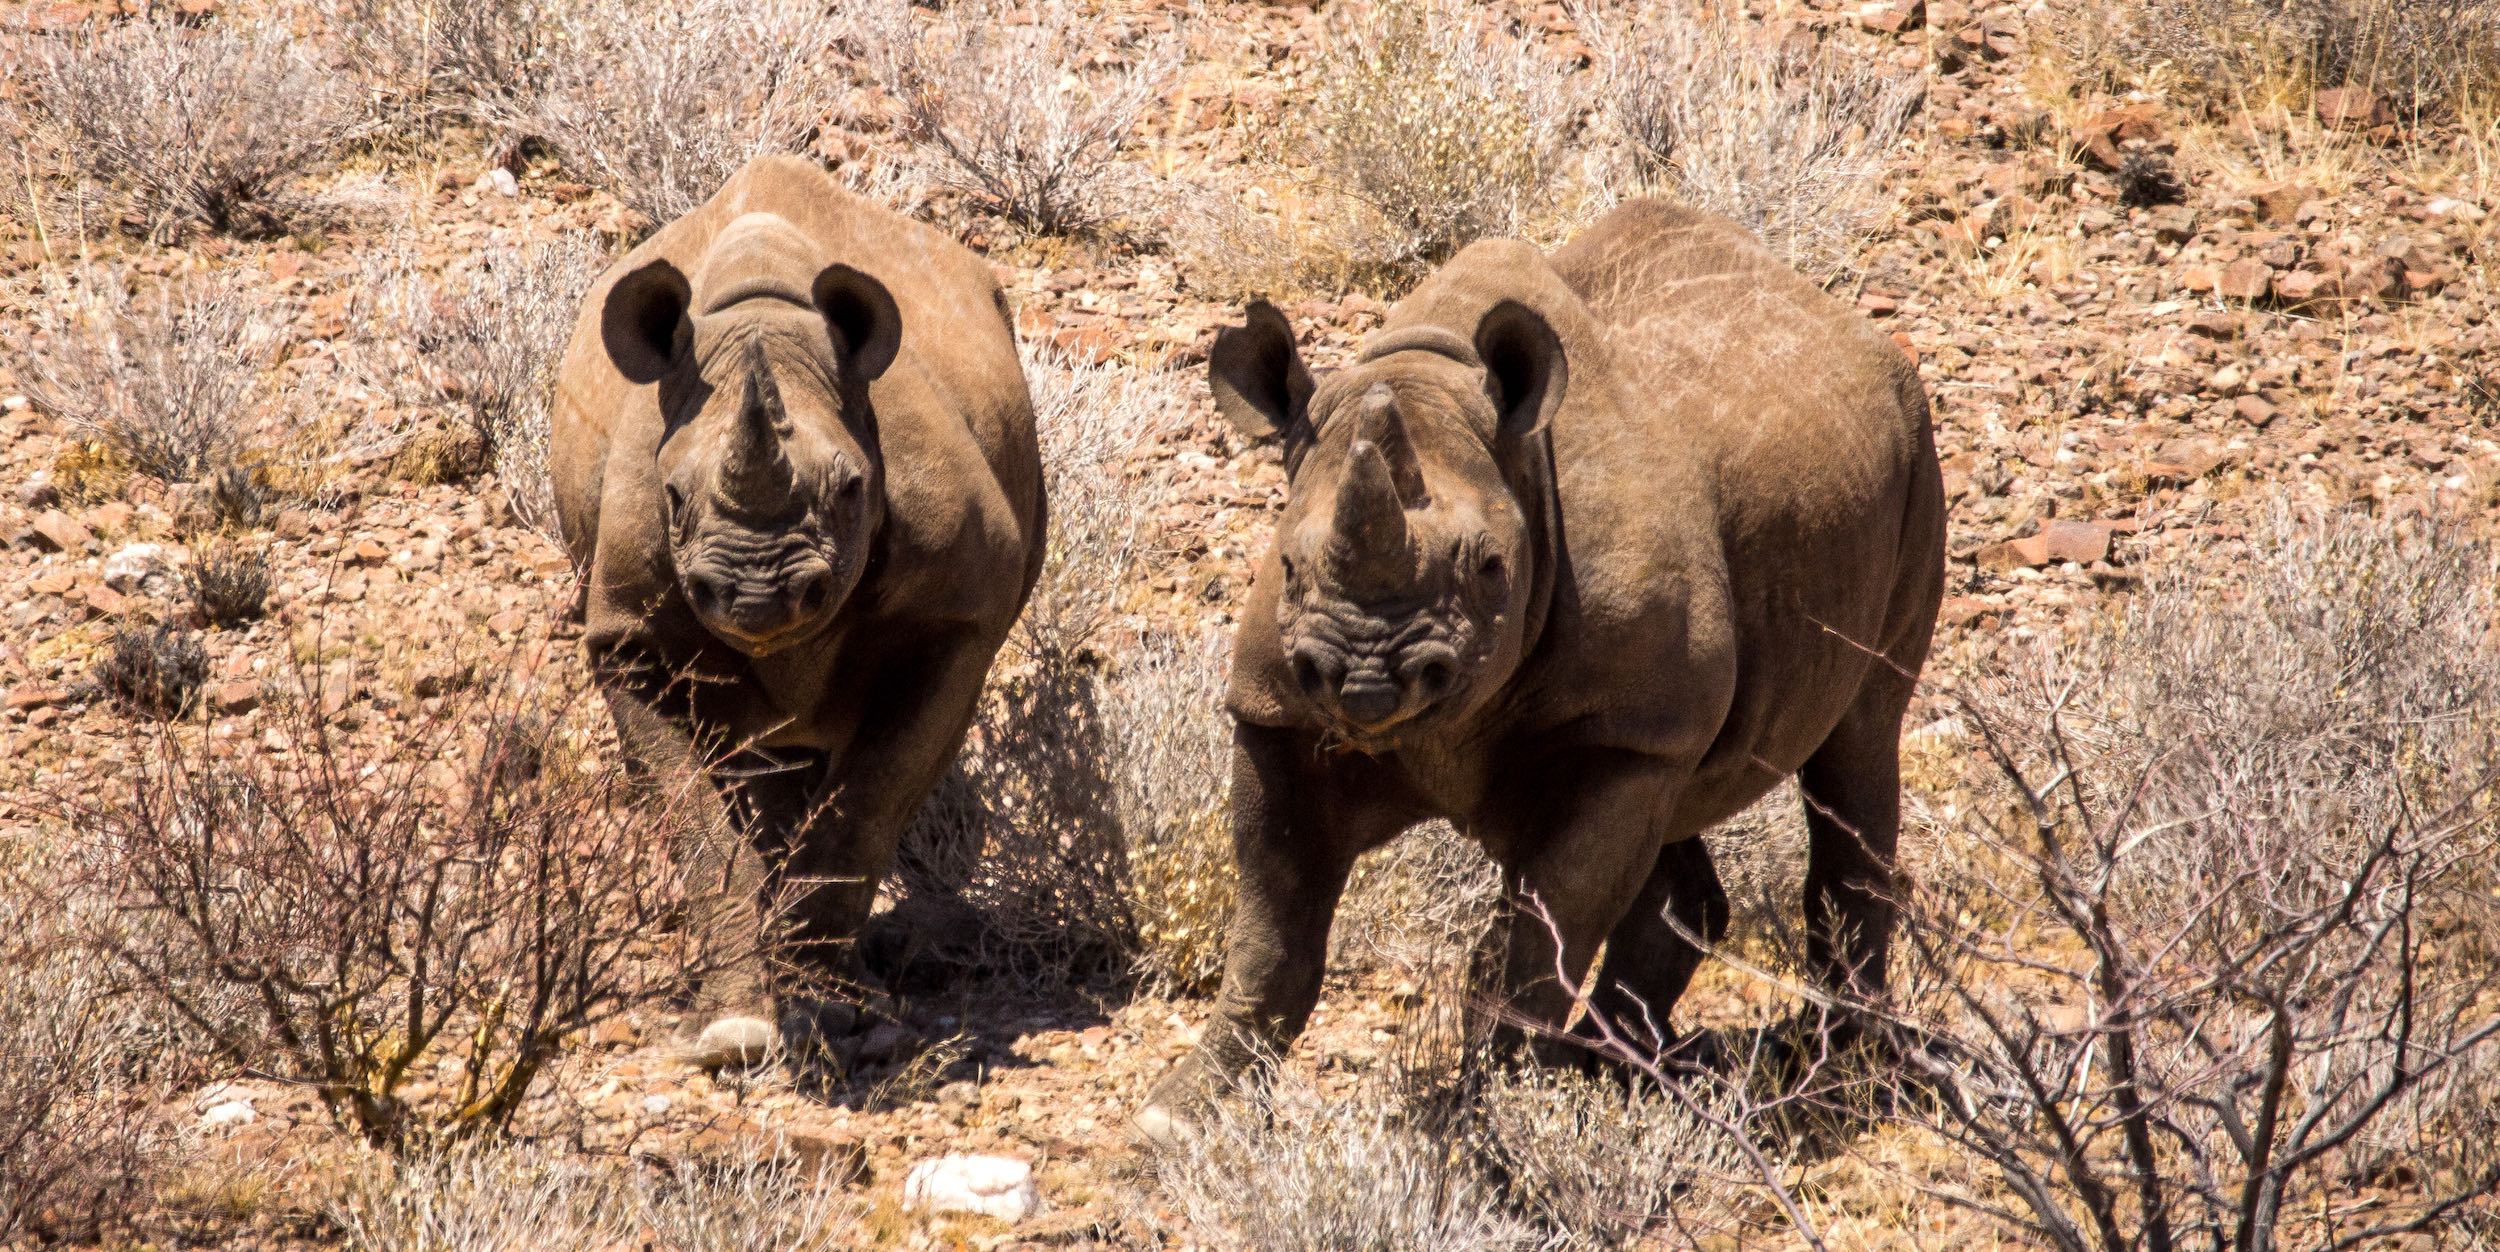 Two black rhinos amongst the rocks and scrub of north-western Namibia.